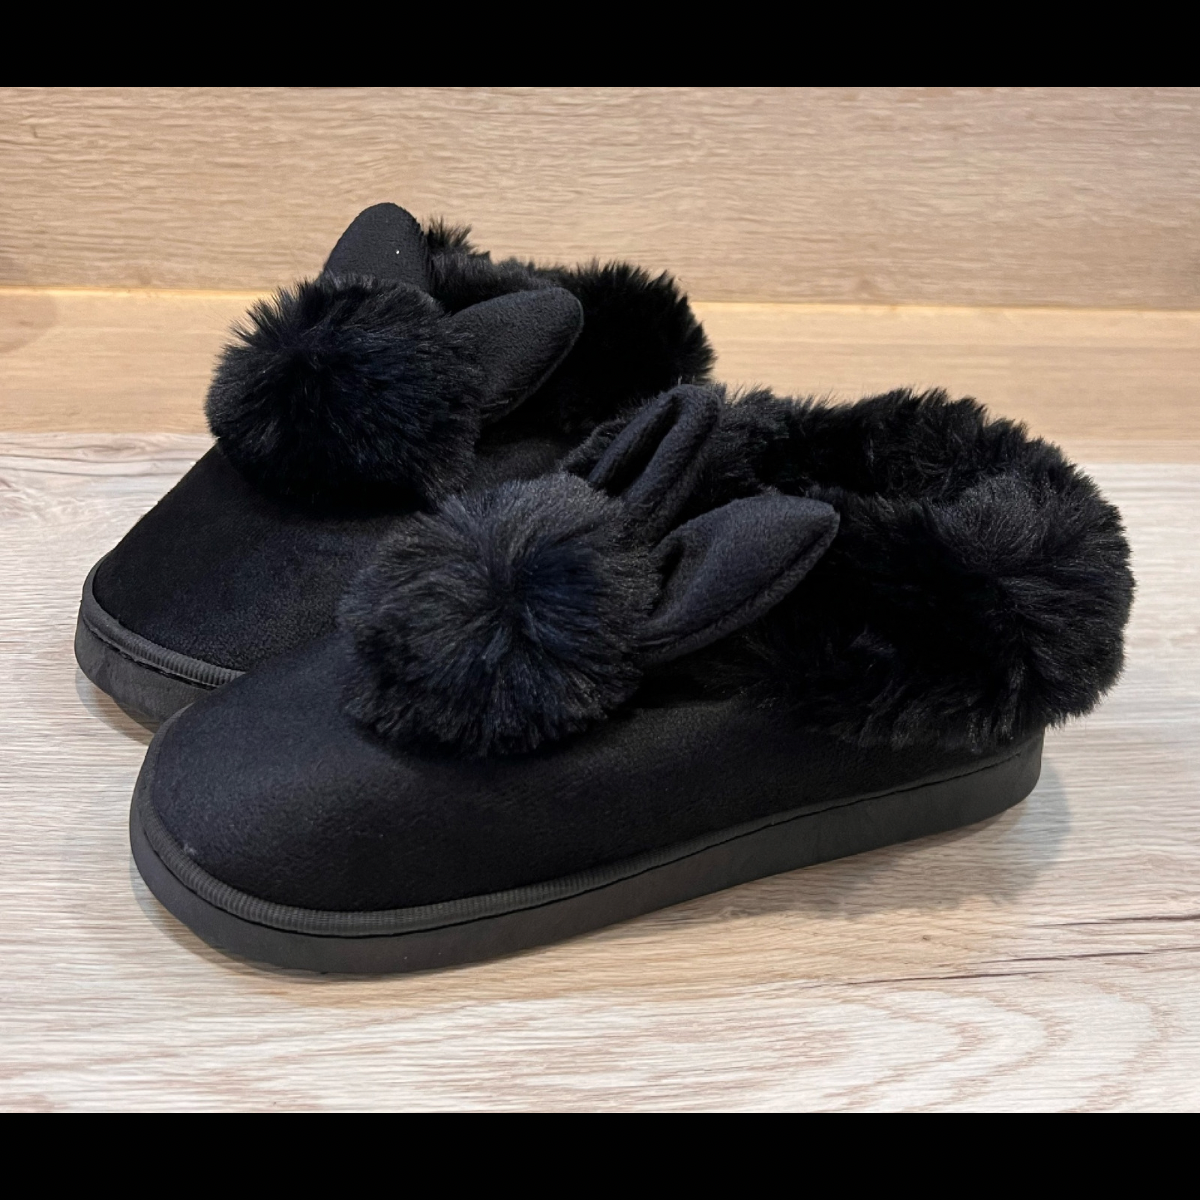 Black outdoor sole fluffy slippers with bunny ears